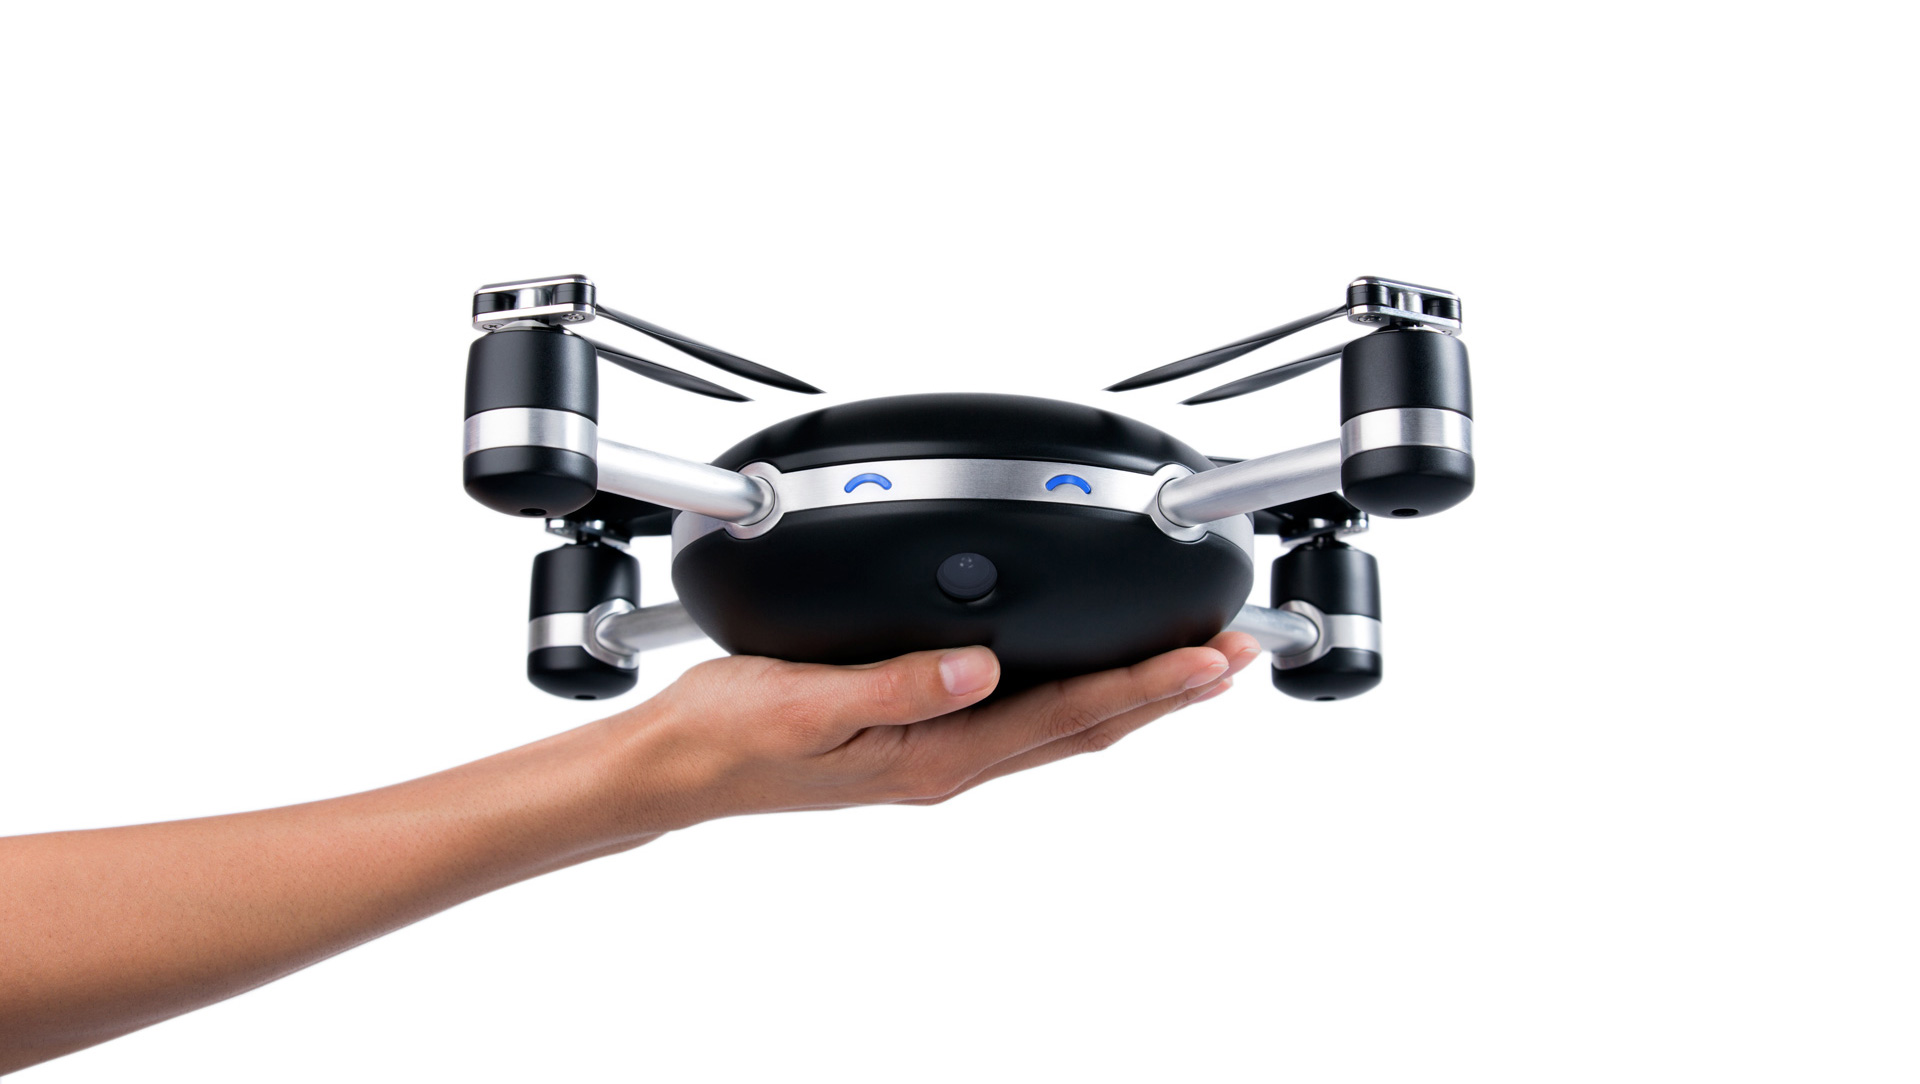 Lily Drone to Wind Down Business Operations, Will Be Issuing Refunds